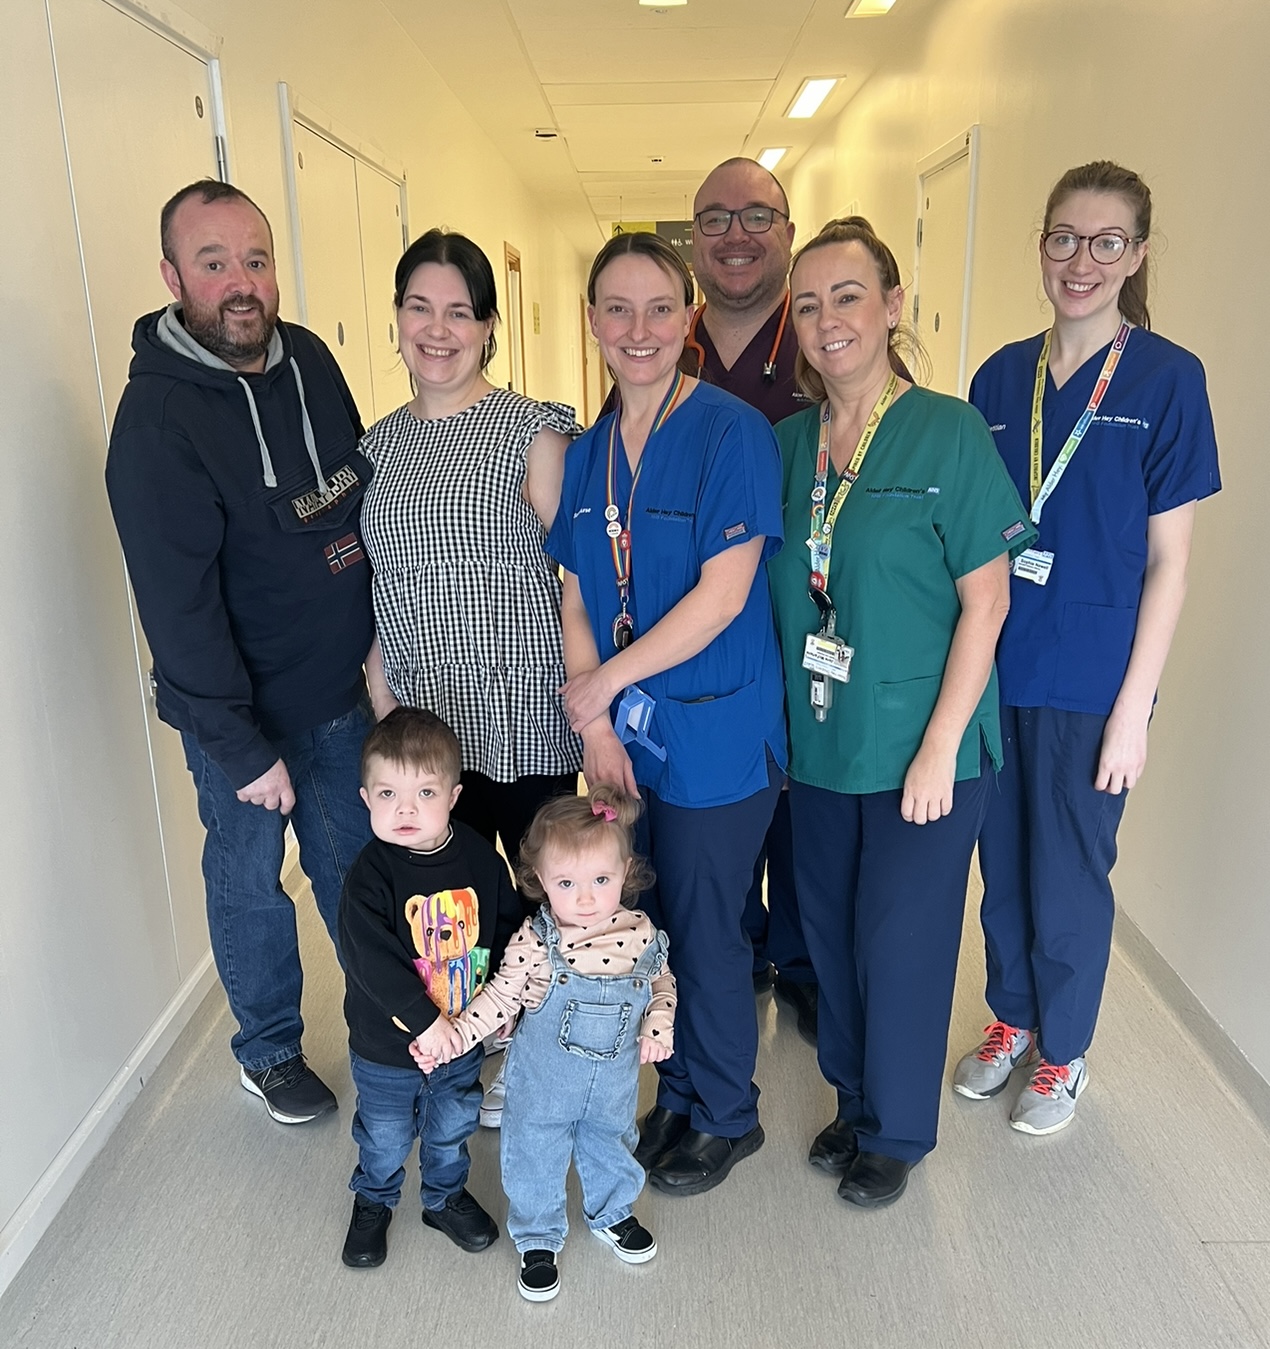 Shaemus Flood, 7, with his family and some of the renal team at Alder Hey Children's Hospital